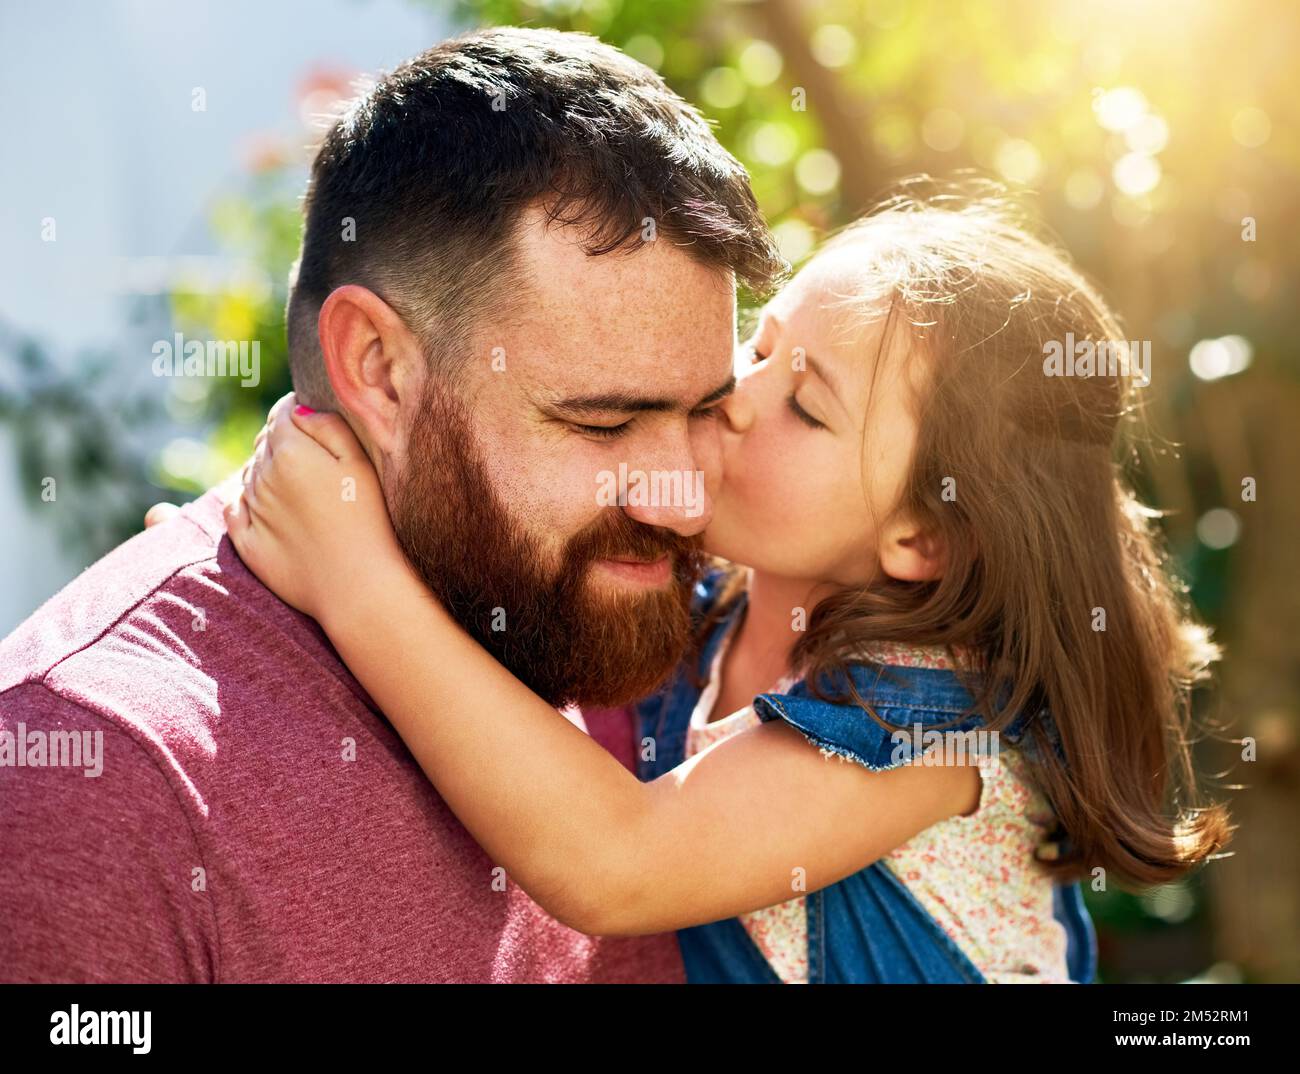 First rule of raising a daughter Love her. an adorable little girl giving her father a kiss outdoors. Stock Photo